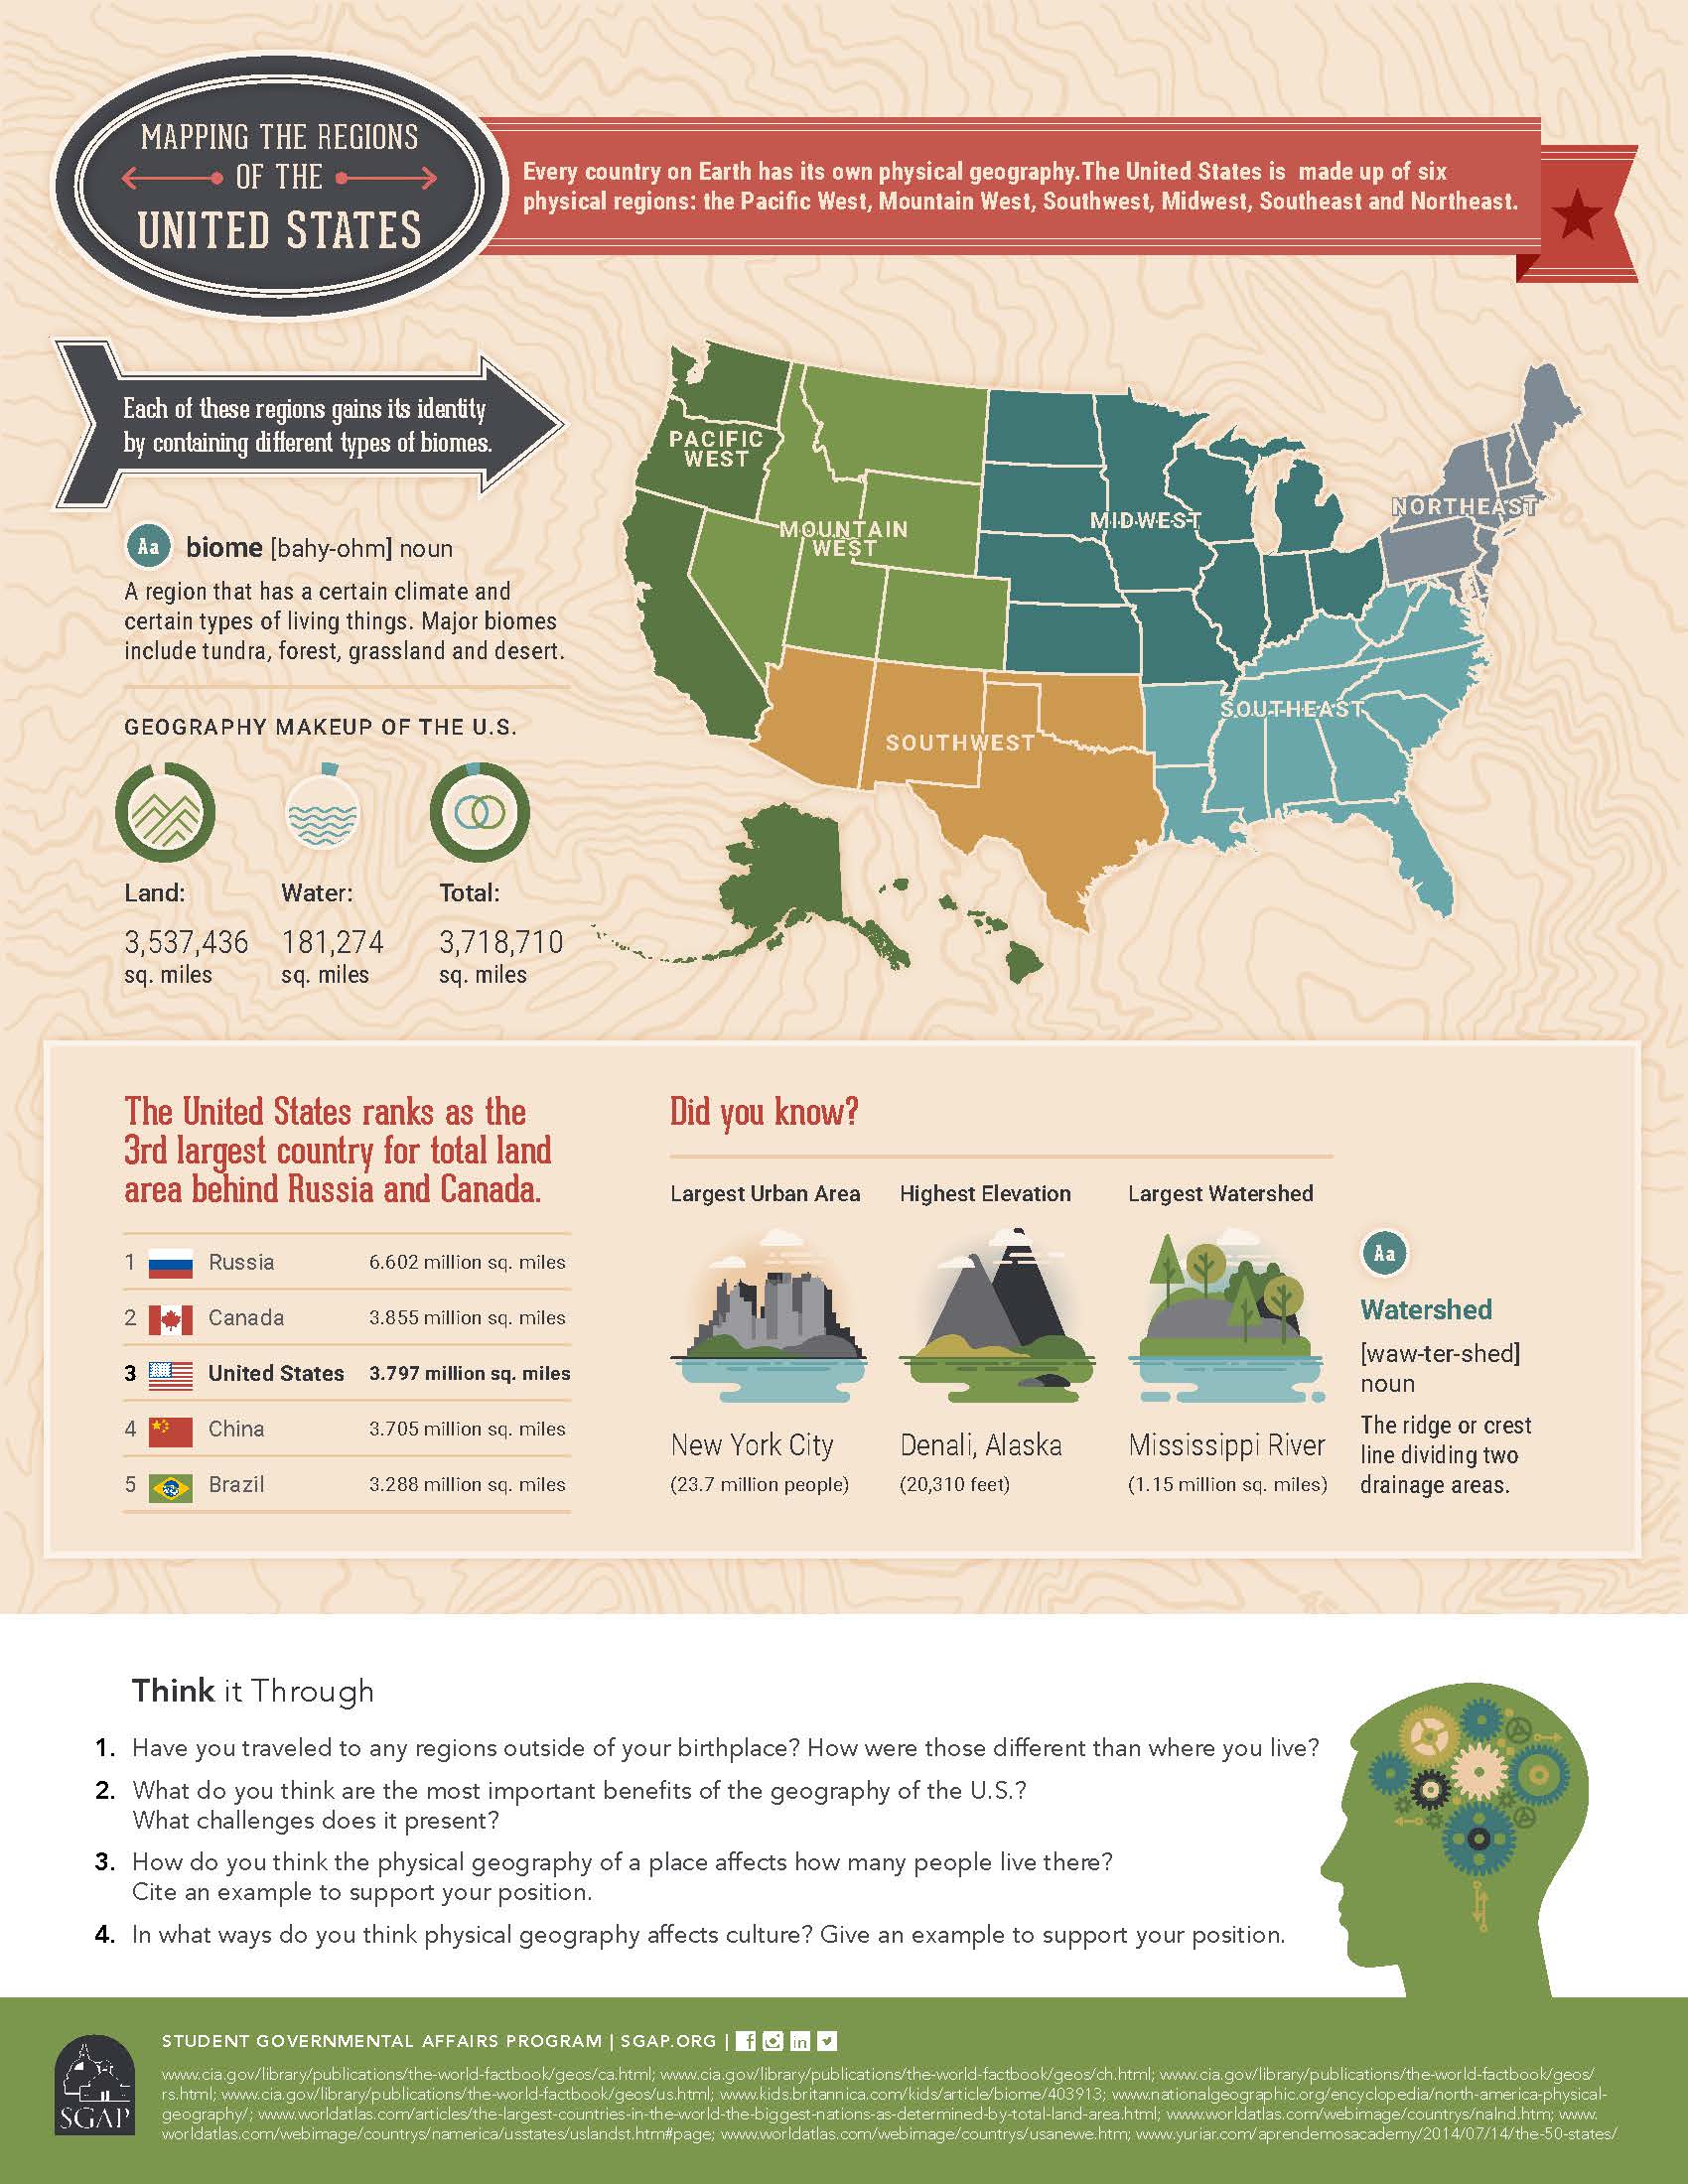 Mapping the Regions of the U.S. Infographic